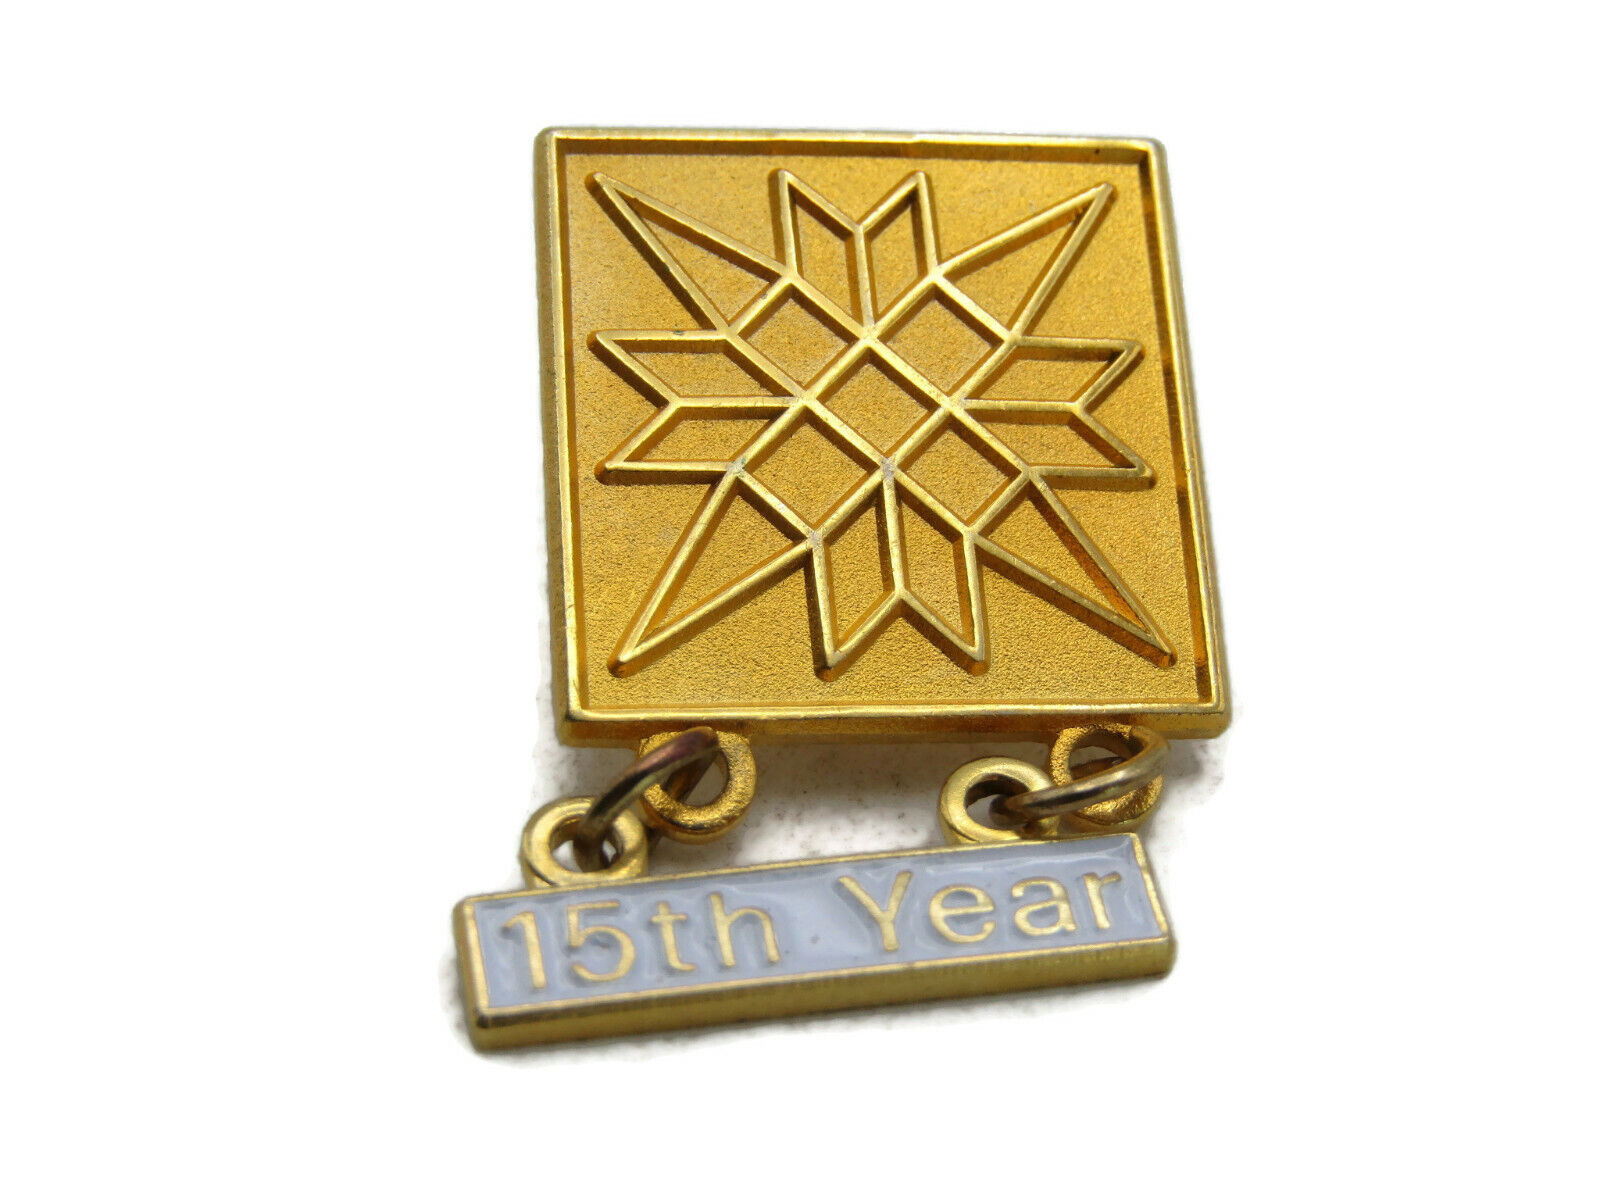 15th Year Lettered Pin Geometric Pattern White & Gold Tone